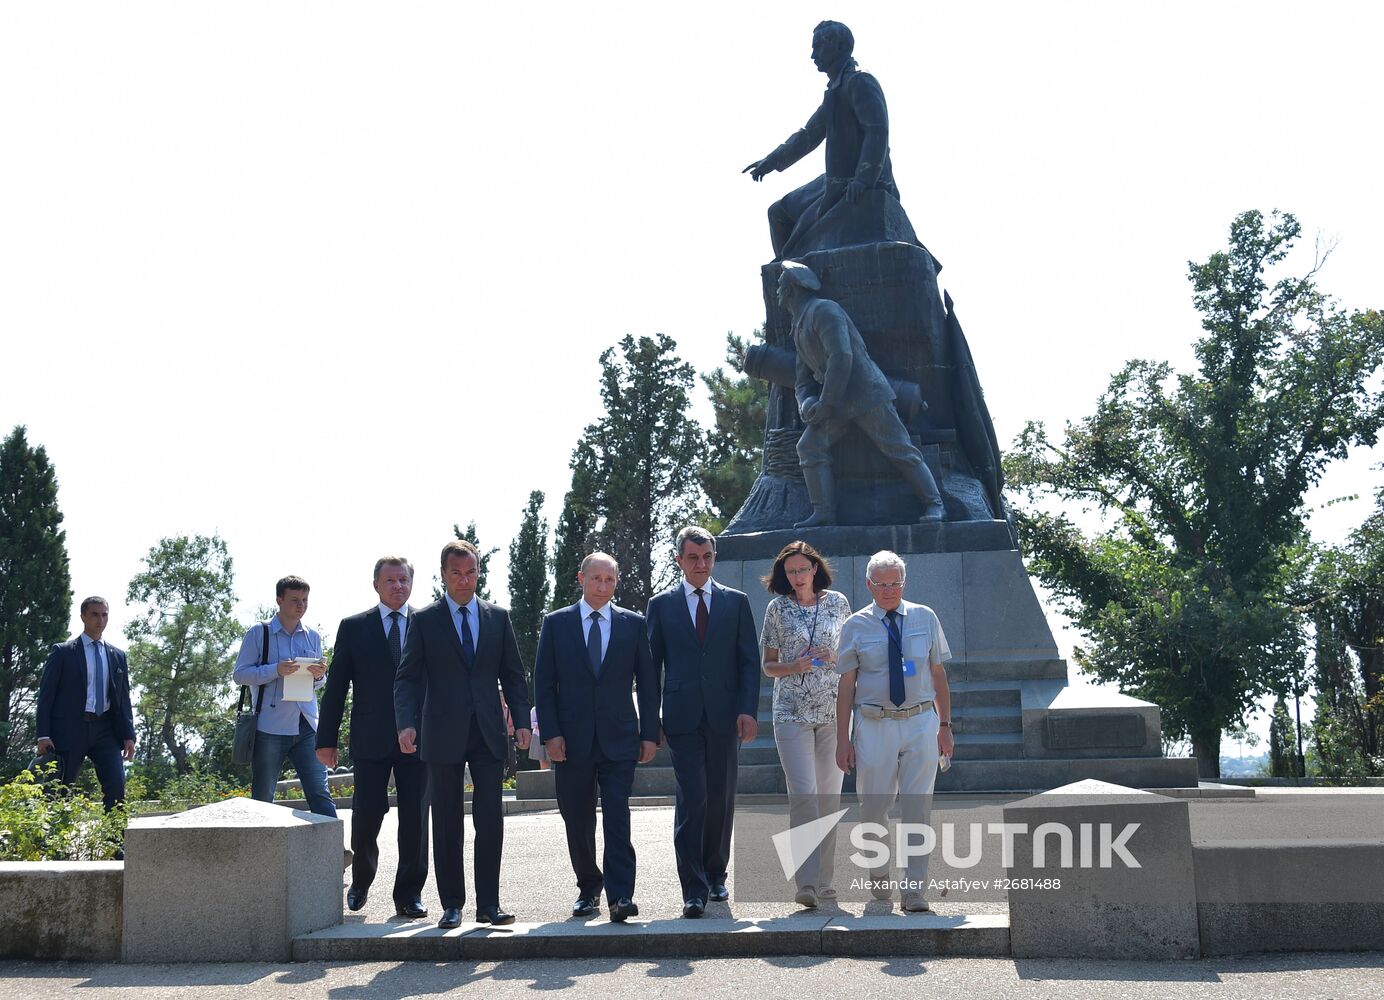 Russian President Vladimir Putin's and Russian Prime Minister Dmitry Medvedev's working visit to Crimea